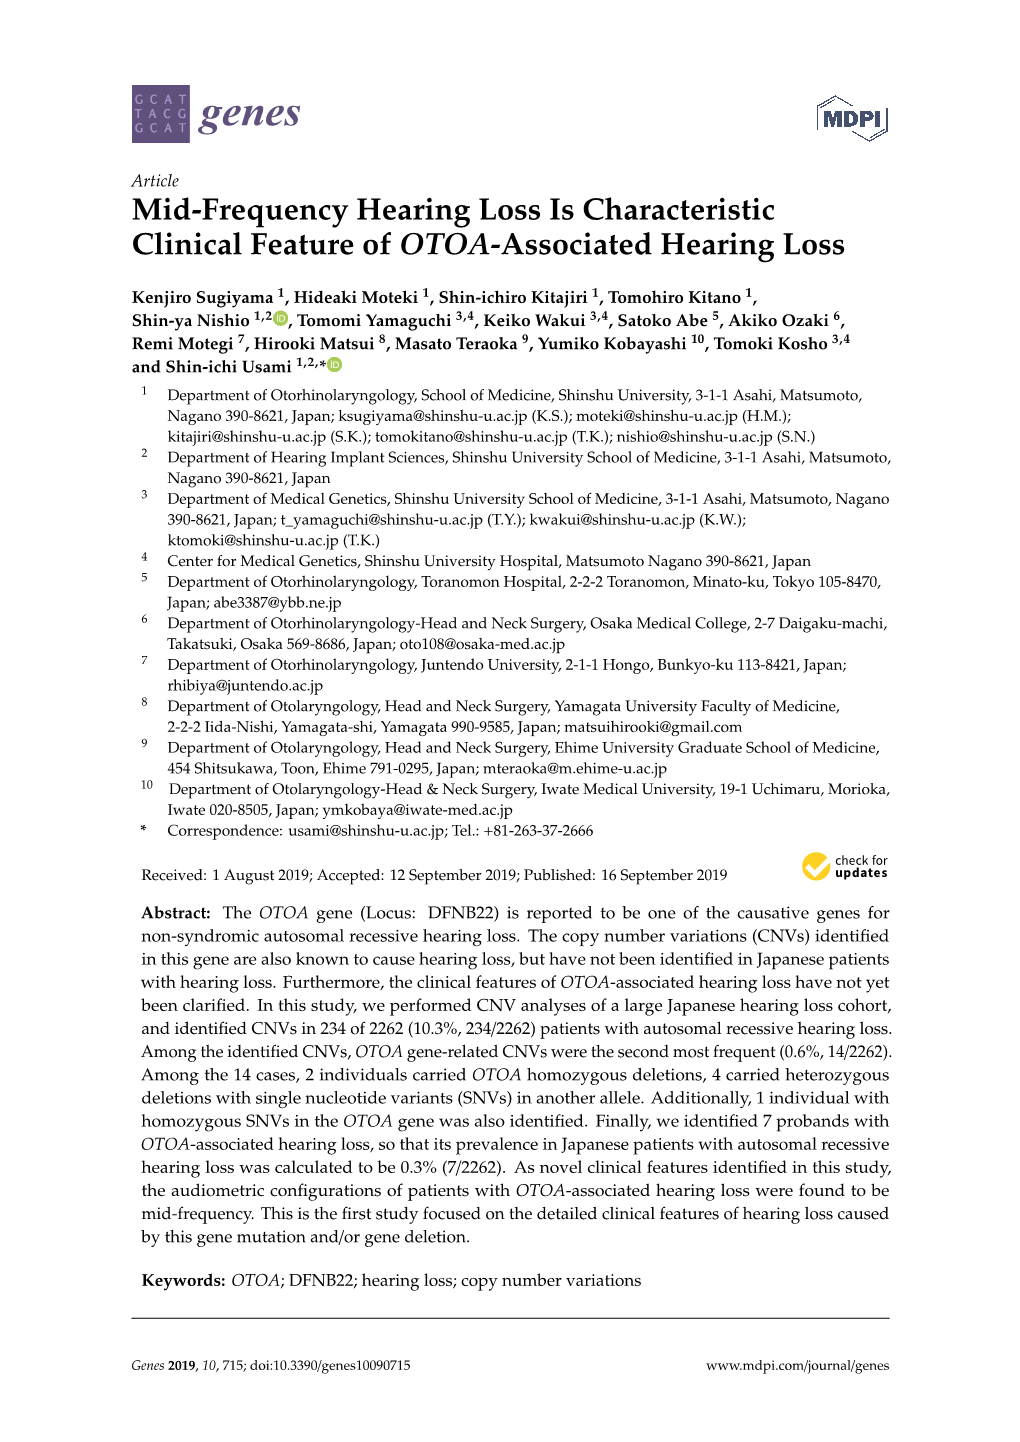 Mid-Frequency Hearing Loss Is Characteristic Clinical Feature of OTOA-Associated Hearing Loss